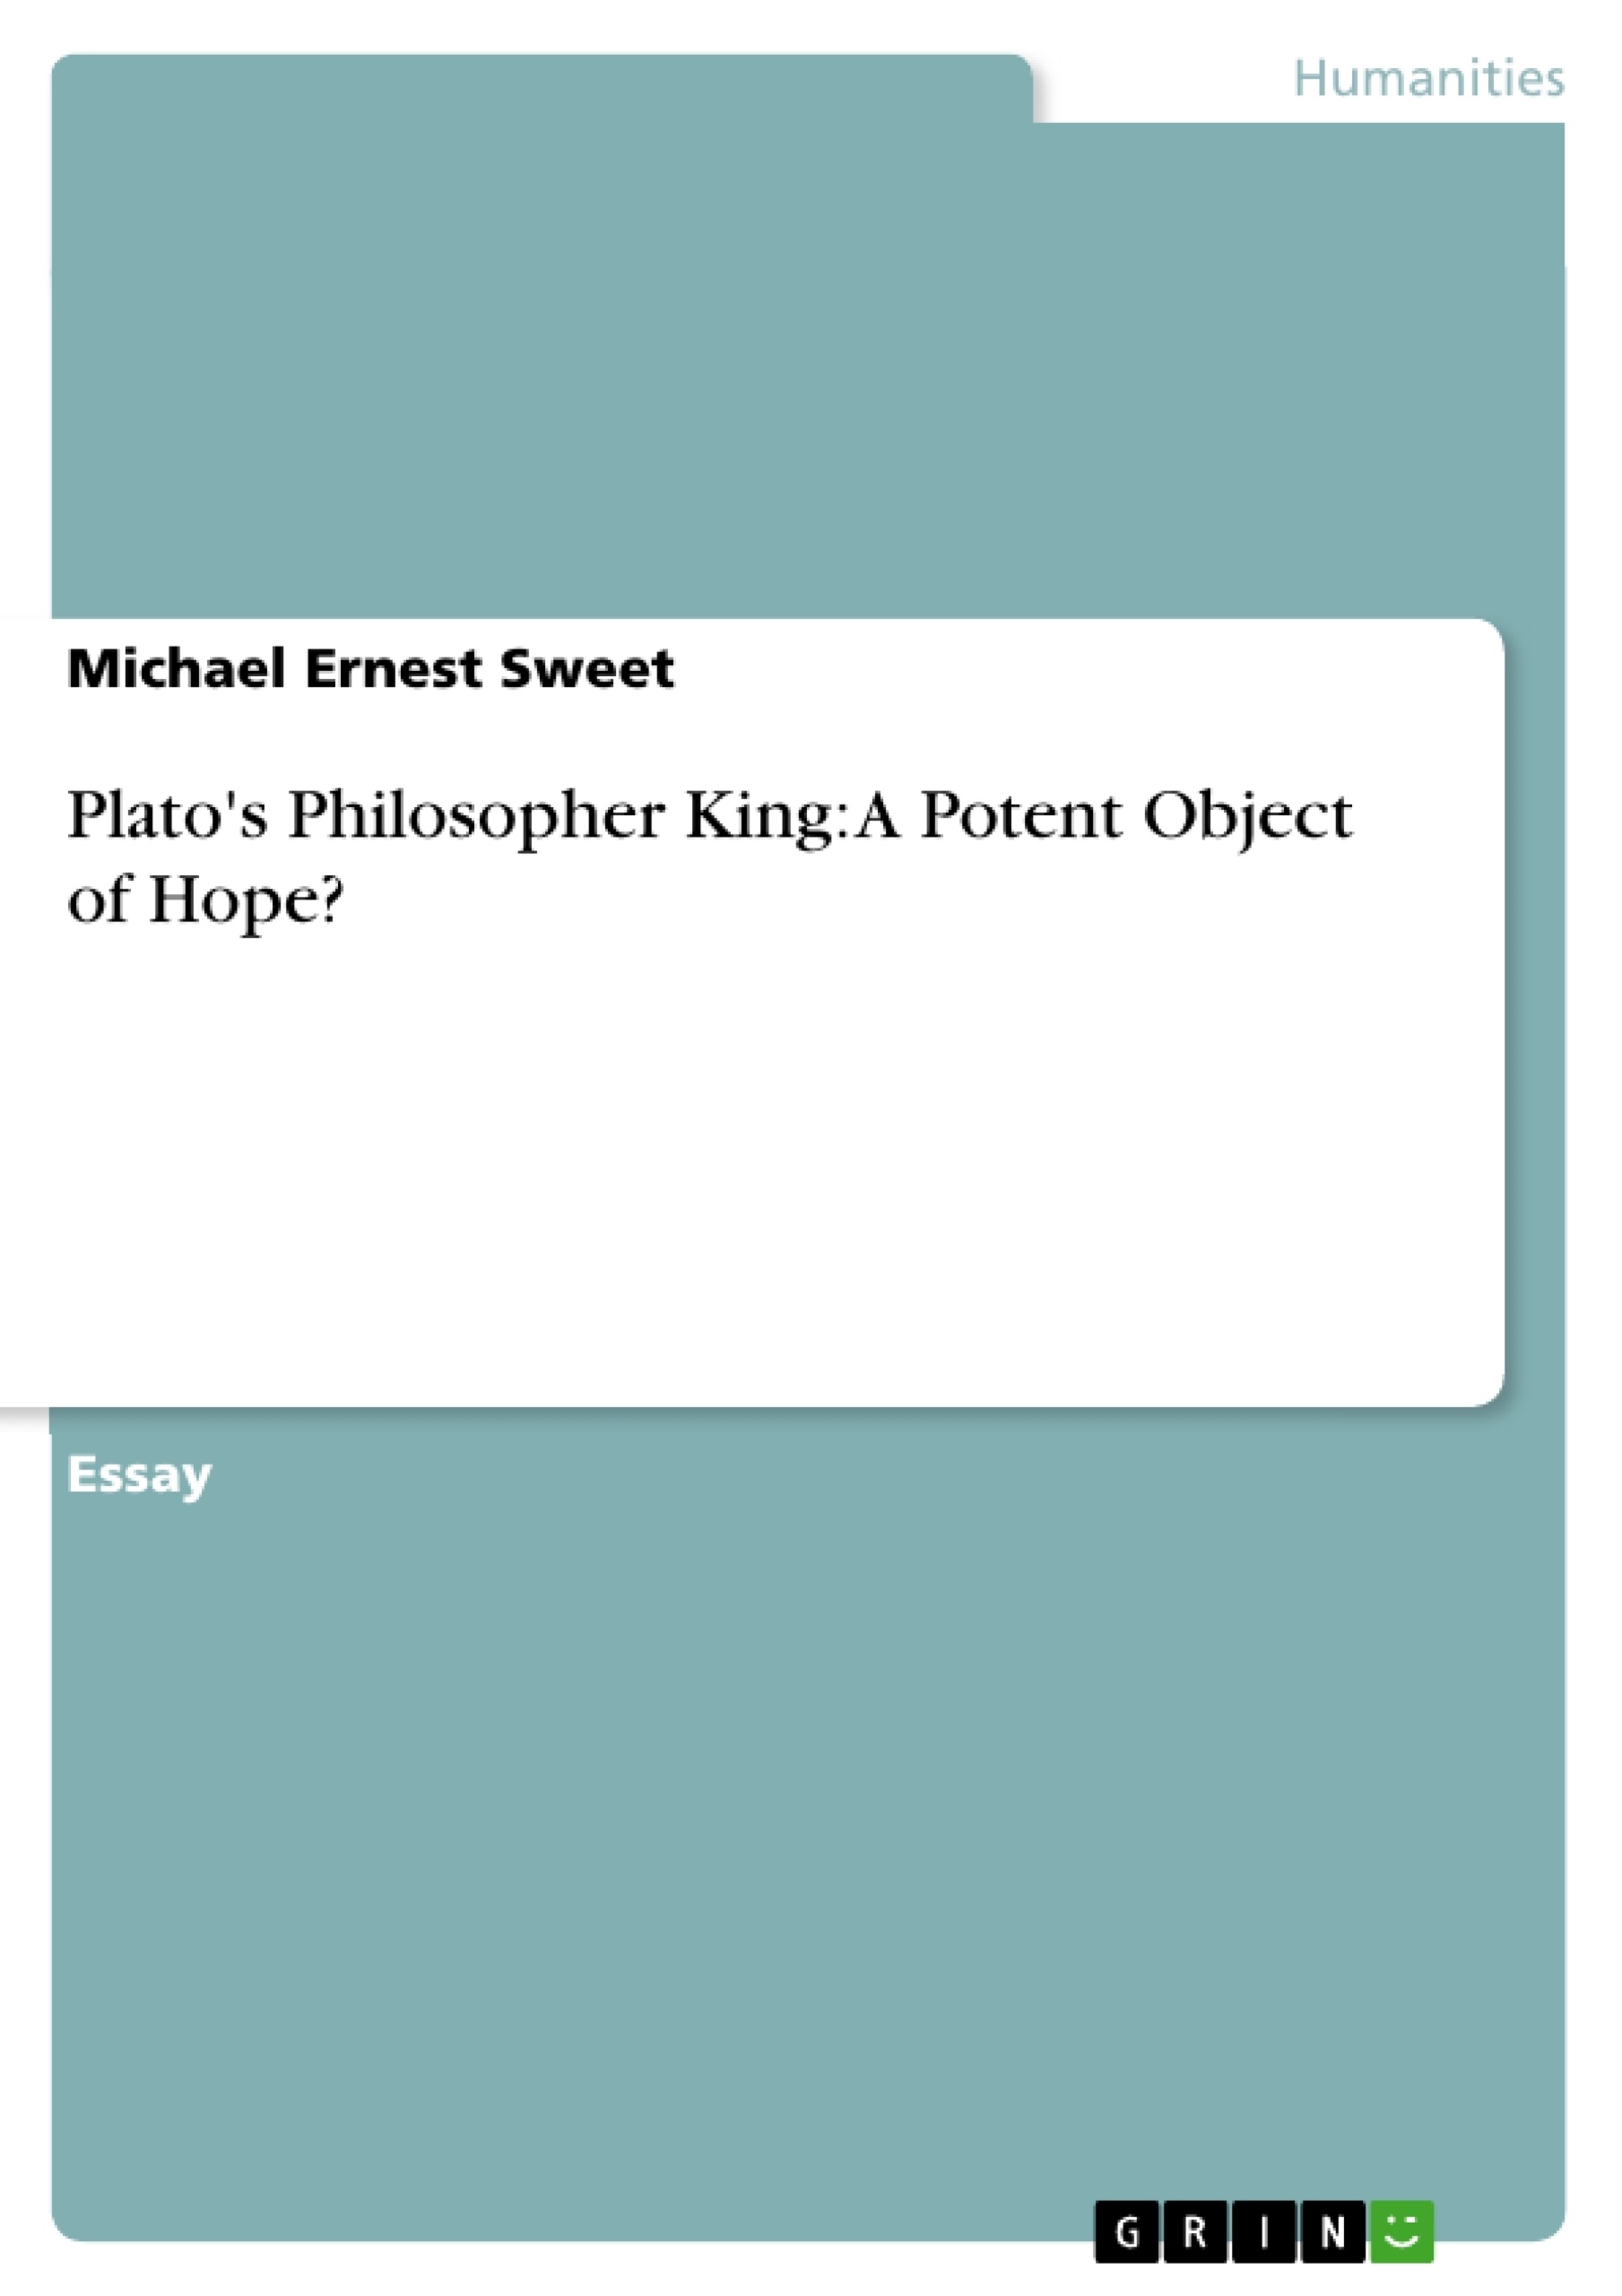 Titre: Plato's Philosopher King: A Potent Object of Hope?